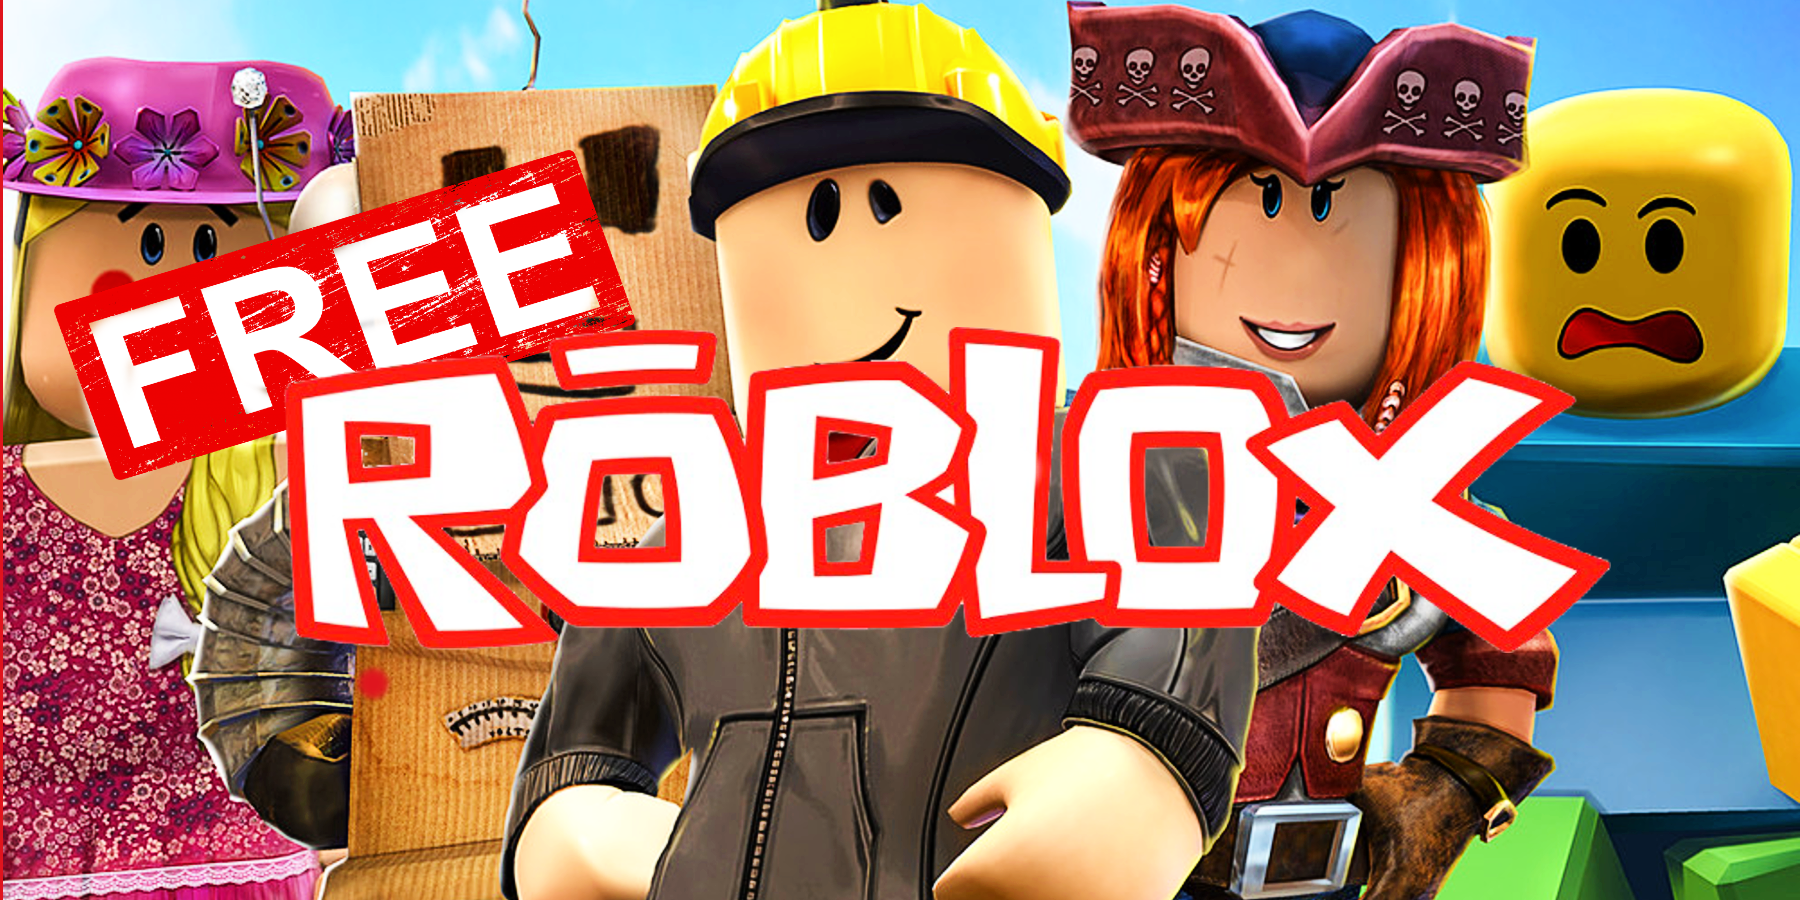 Tomes of the Magus Roblox Promo Code